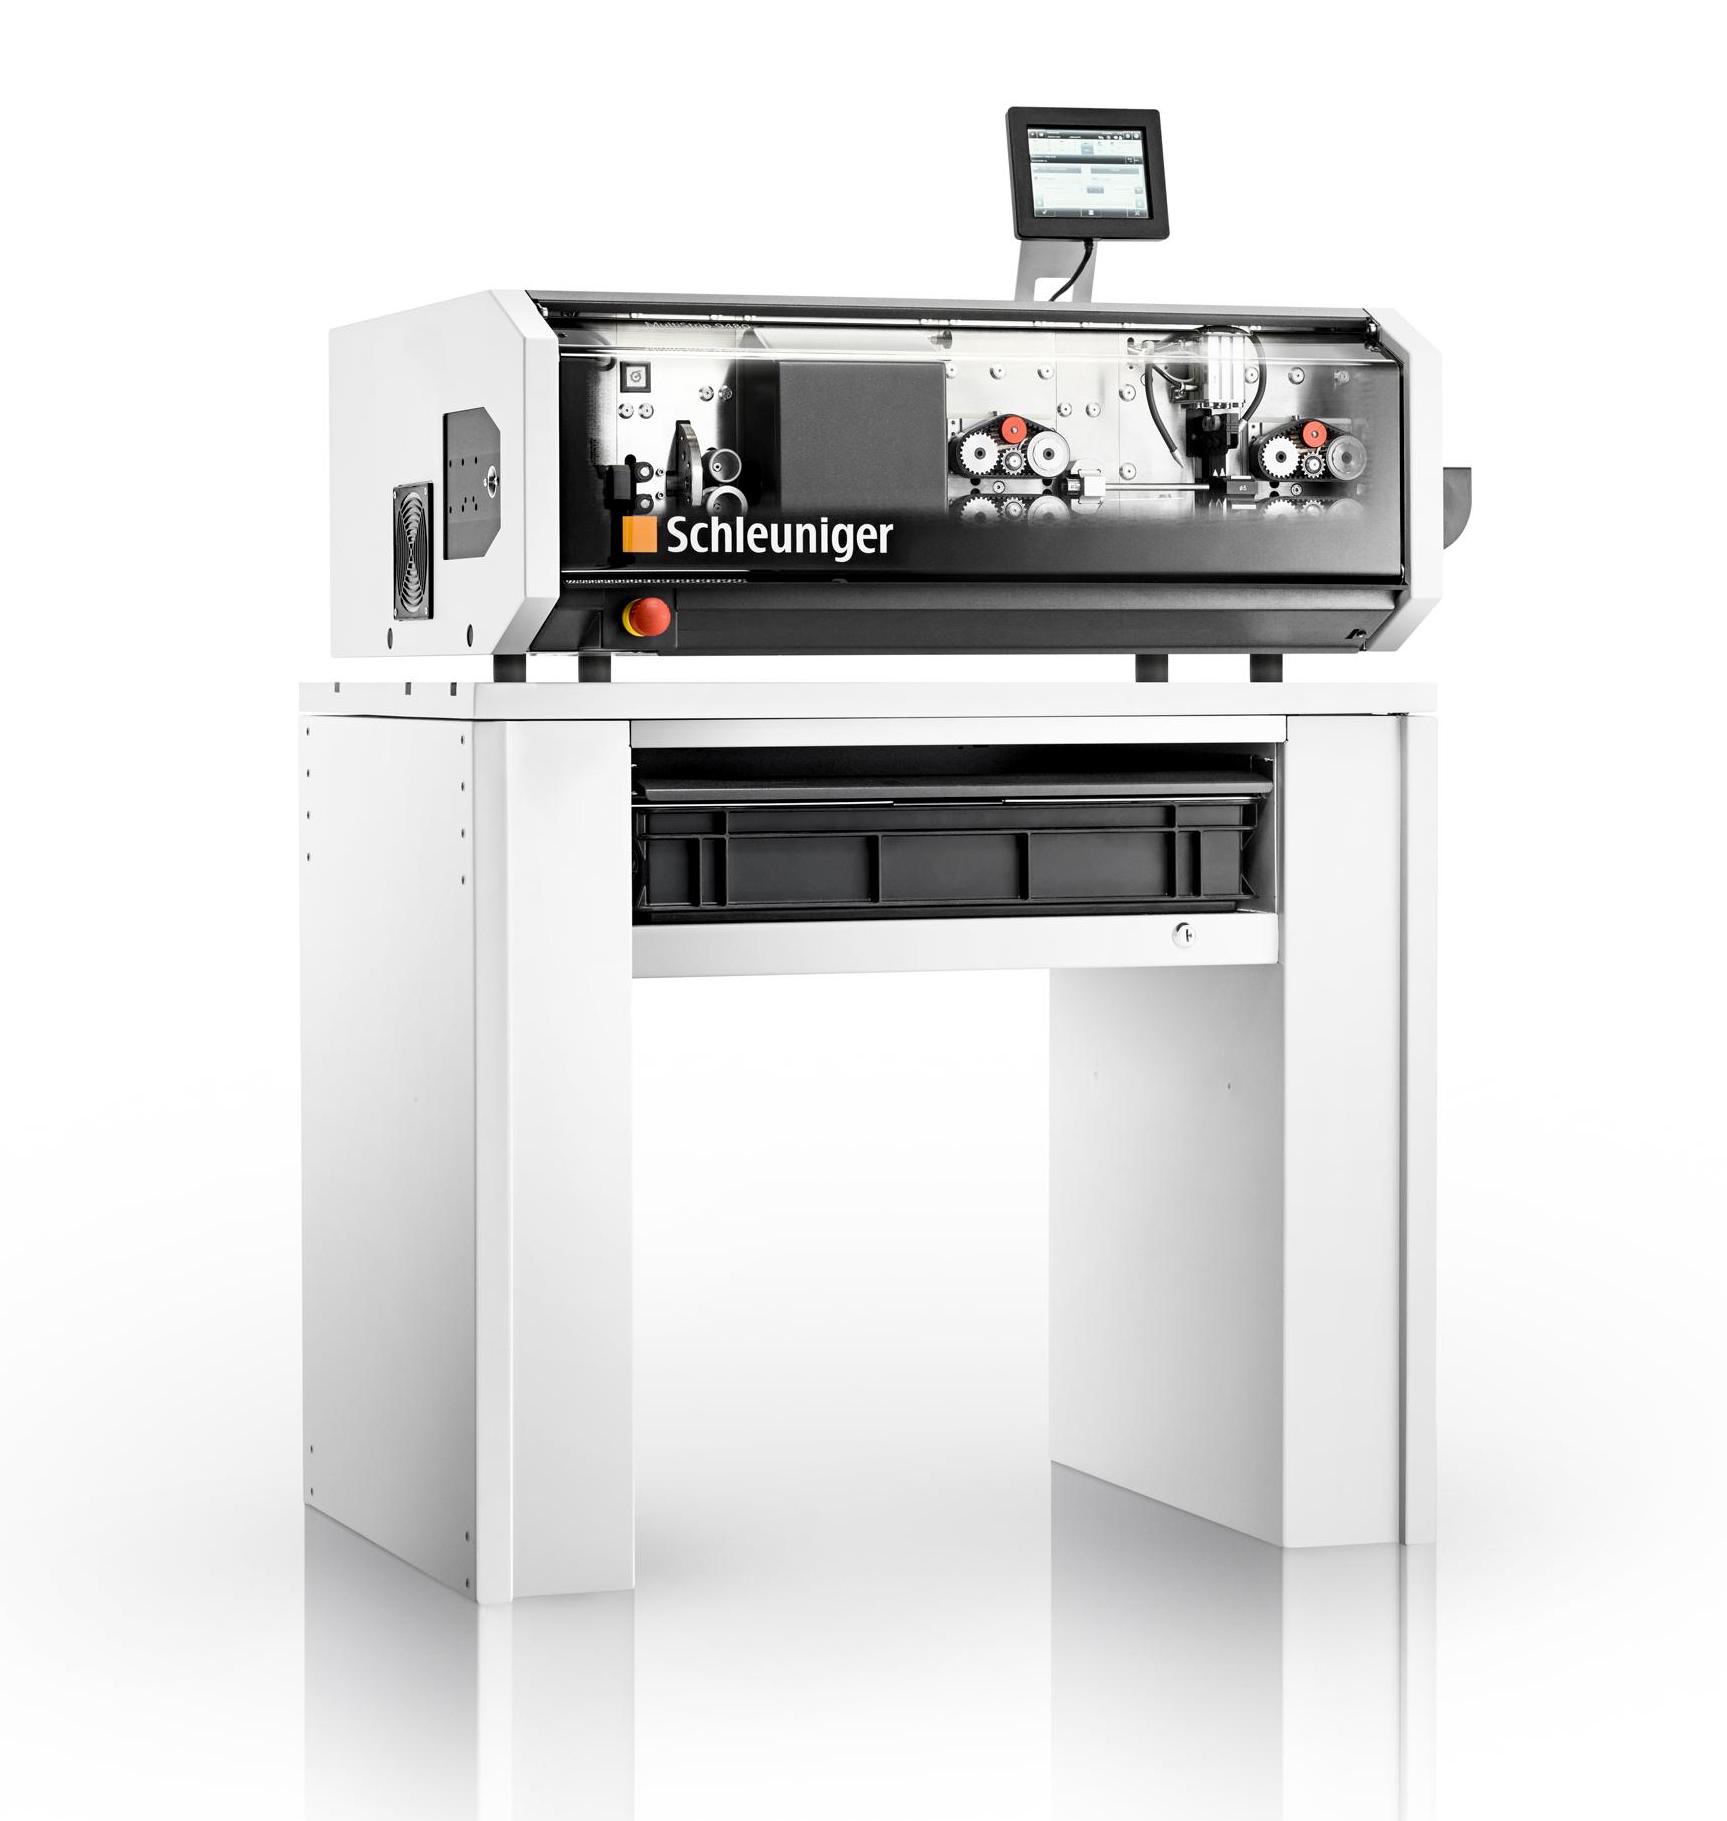 Schleuniger’s MultiStrip 9480 Cut & Strip Machine is designed to minimize changeover time and maximize productivity